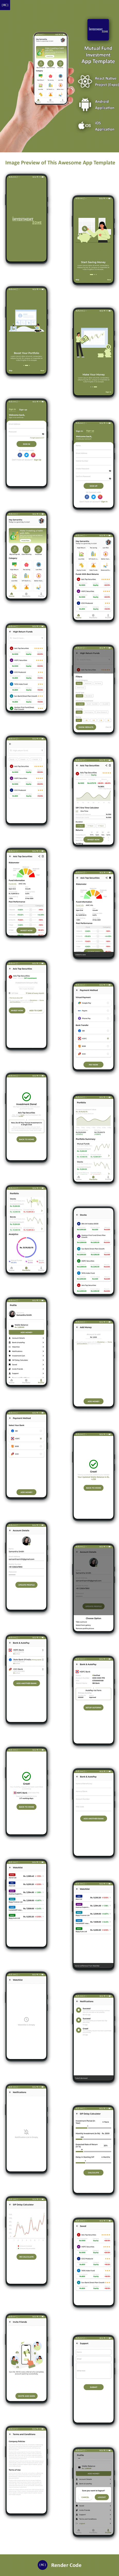 Mutual Fund Investment Template | Trading Android + iOS Template | React Native | InvestmentZone - 12